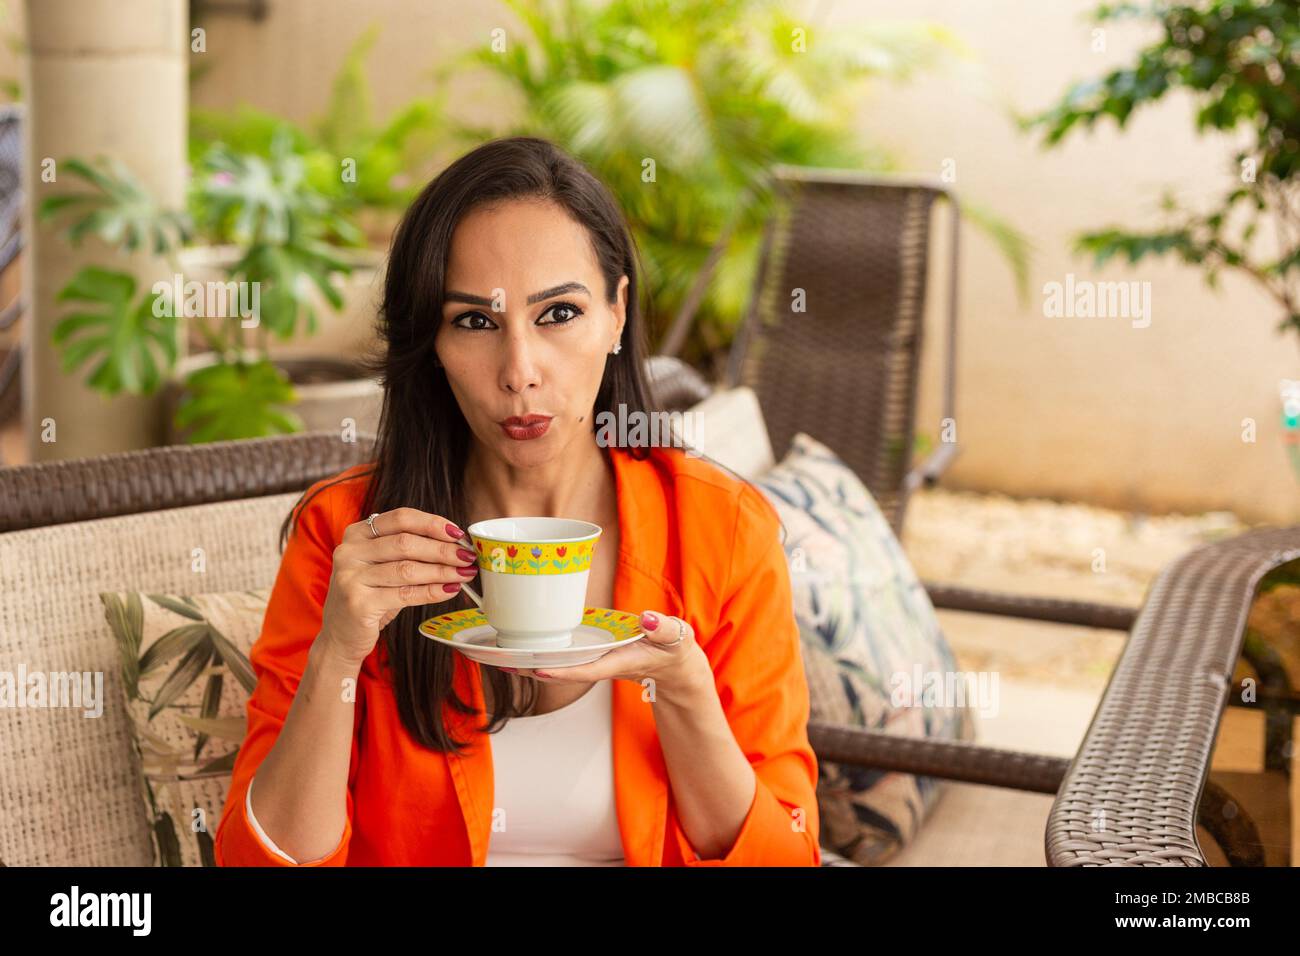 Goiania, Goiás, Brazil – January 10, 2023: A young woman, having tea, sitting in a chair with a calm expression, on the porch of her house. Half body Stock Photo